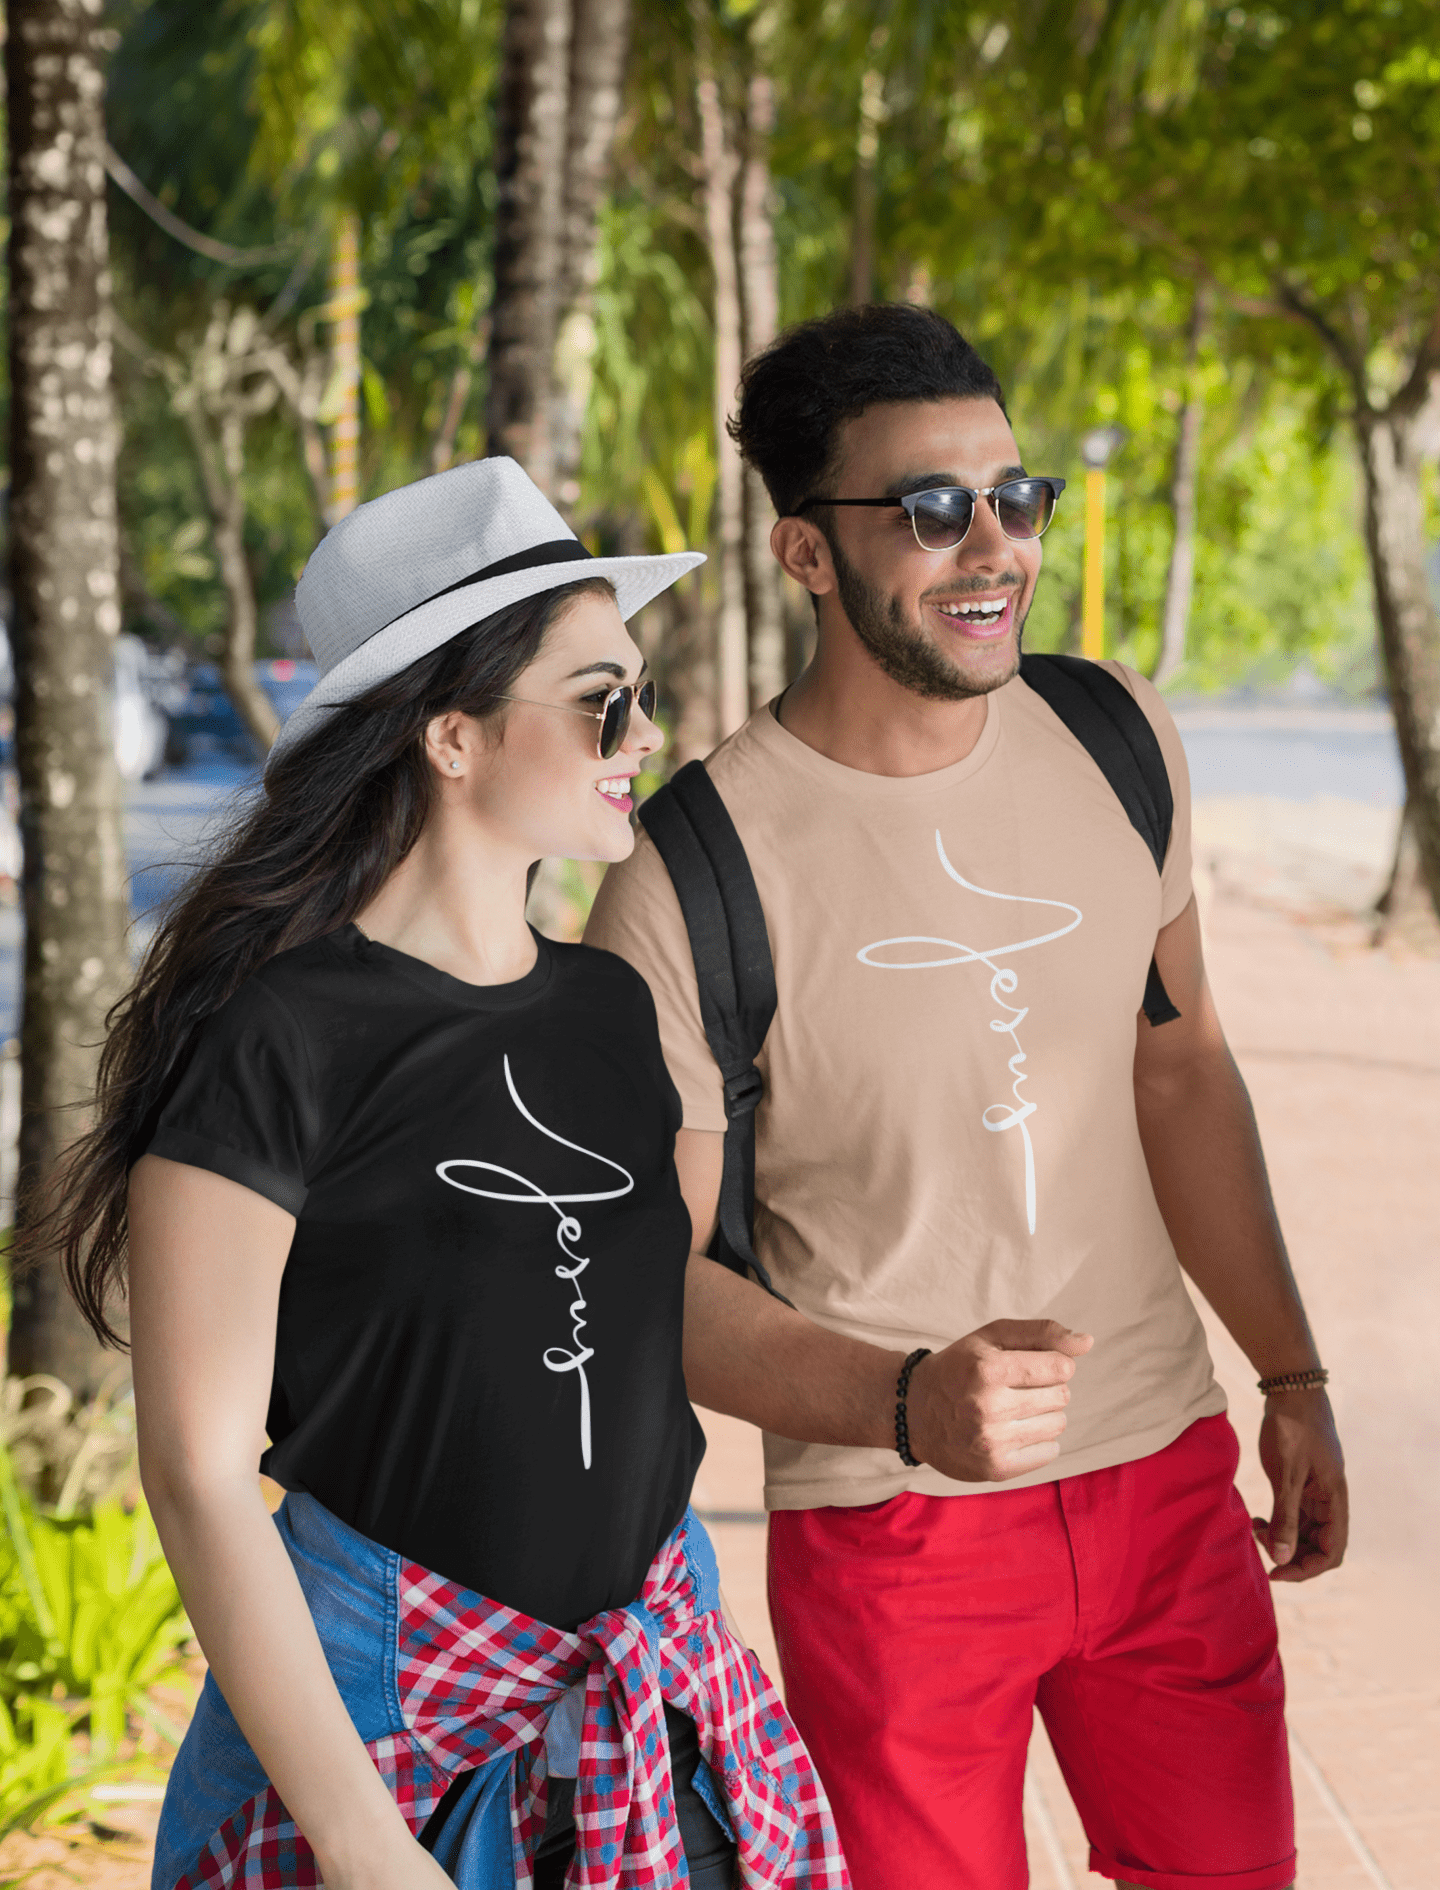 Jesus Cross Christian T-Shirt - Cursive White Font Neutral Color Tees Black on happy female, heather peach on happy male at the beach